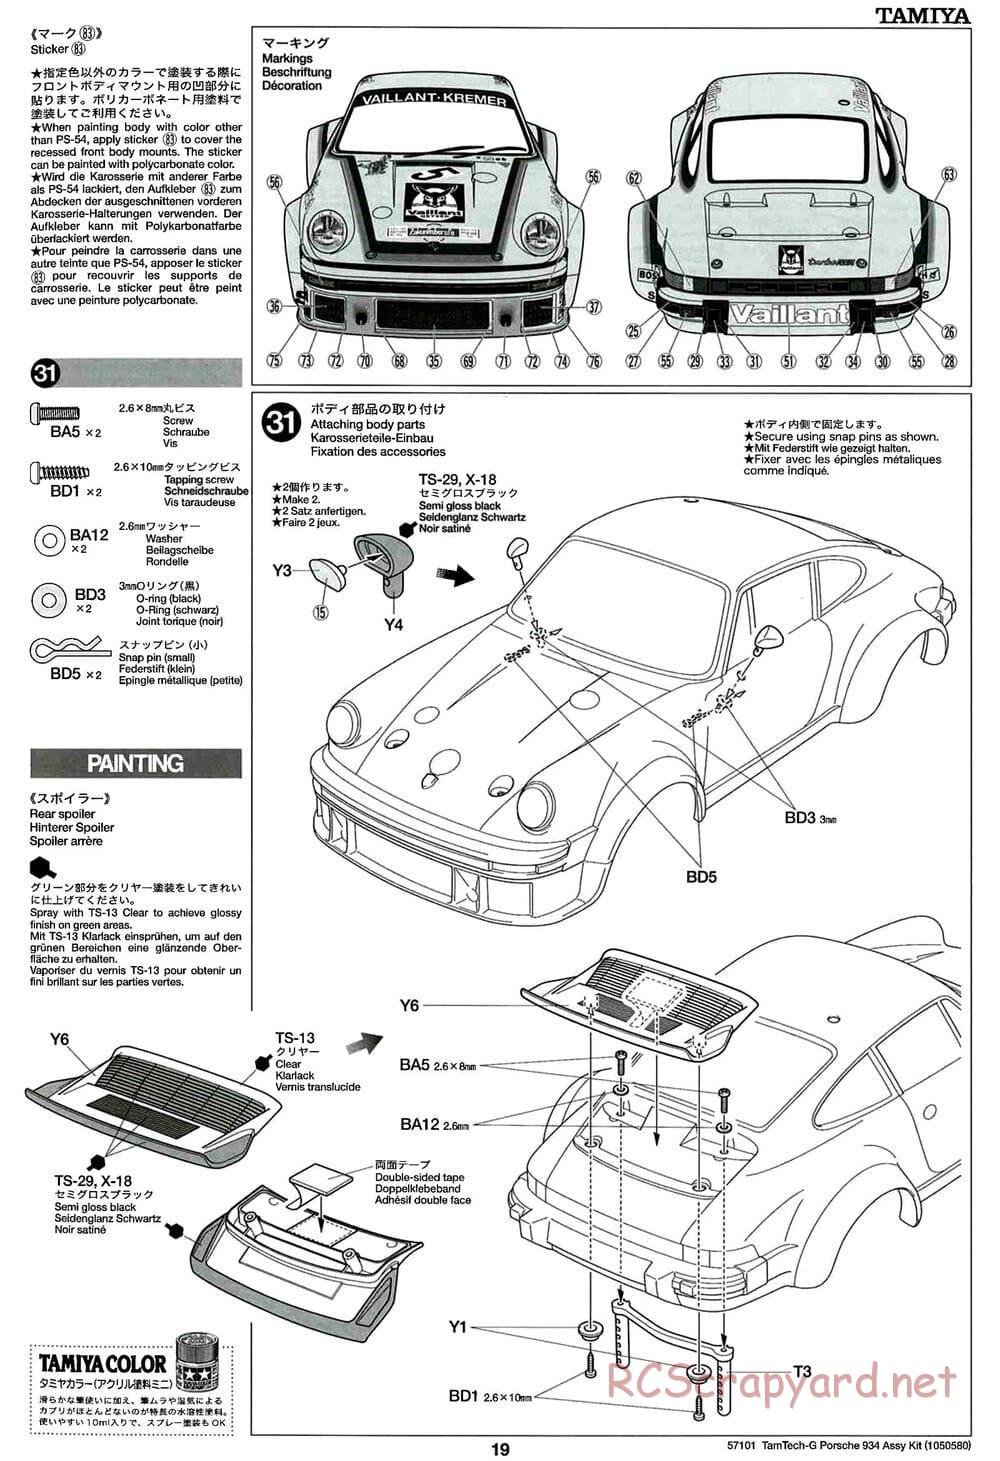 Tamiya - Porsche Turbo RSR - GT-01 Chassis - Manual - Page 19